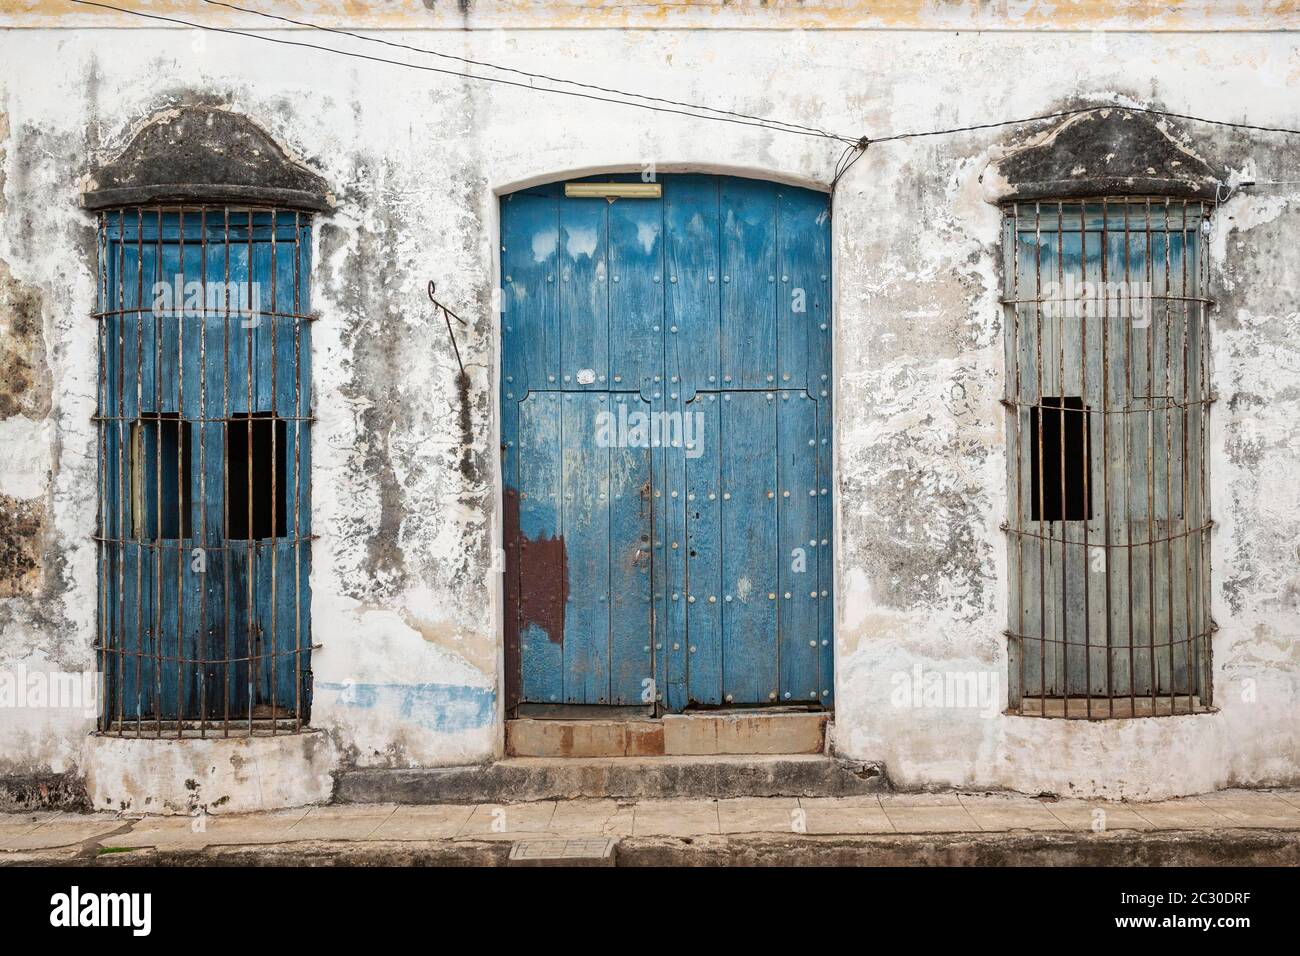 Decayed facade of crumbling plaster and weathered wooden door and windows, Remedios, Cuba Stock Photo